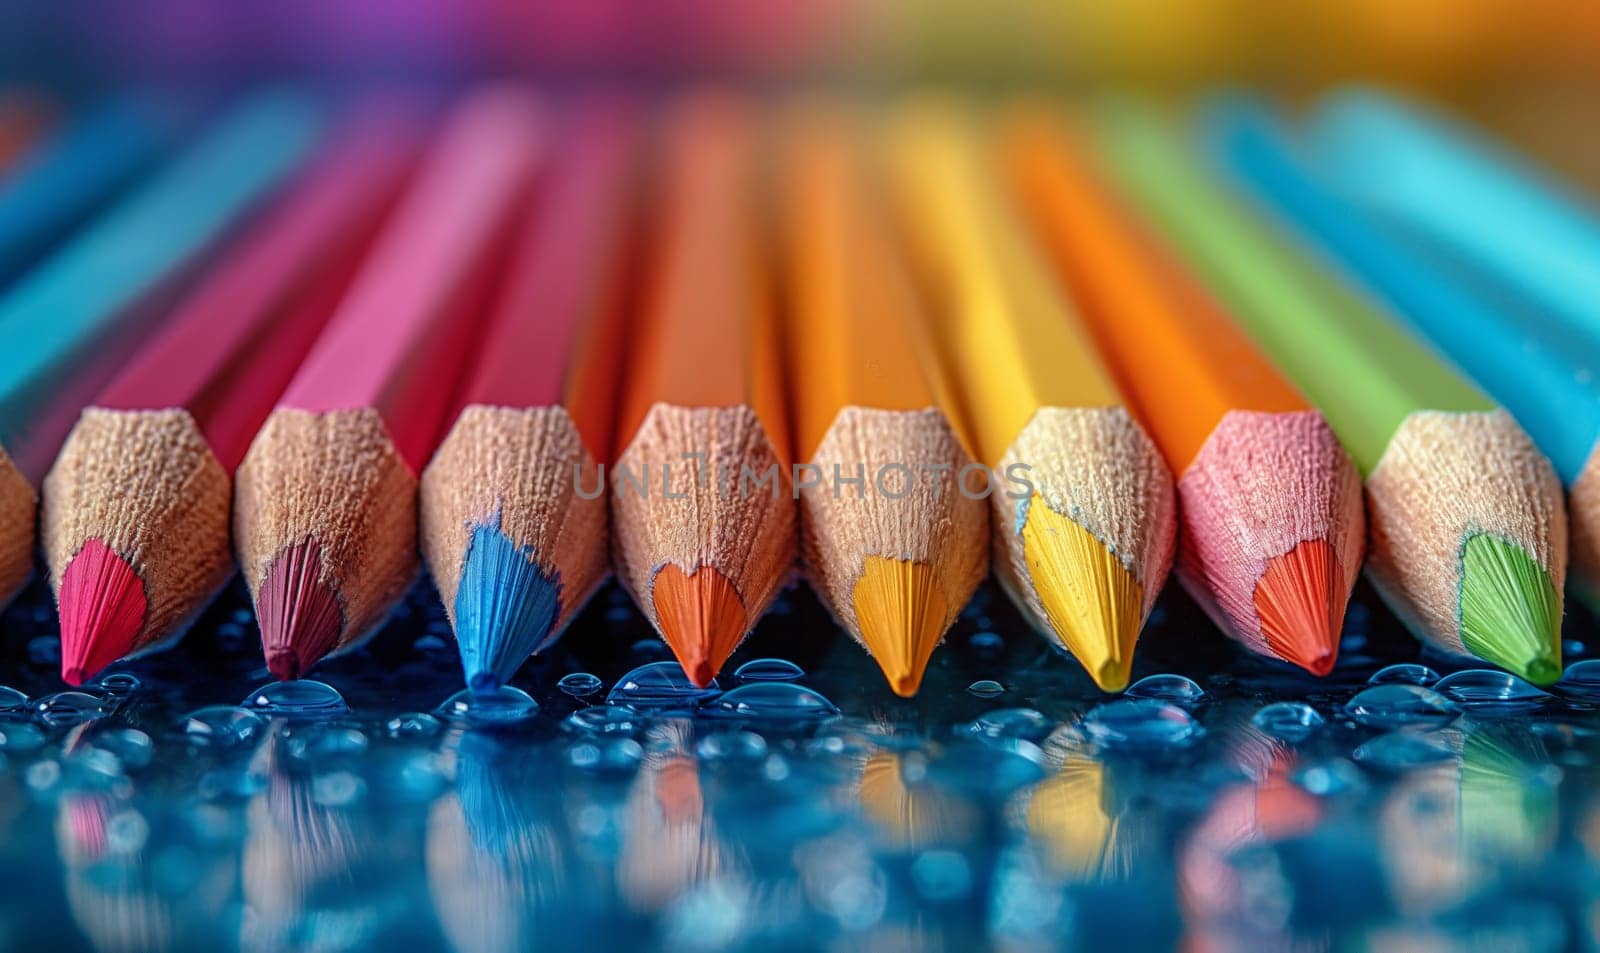 Colored Pencils in a Row. by Fischeron